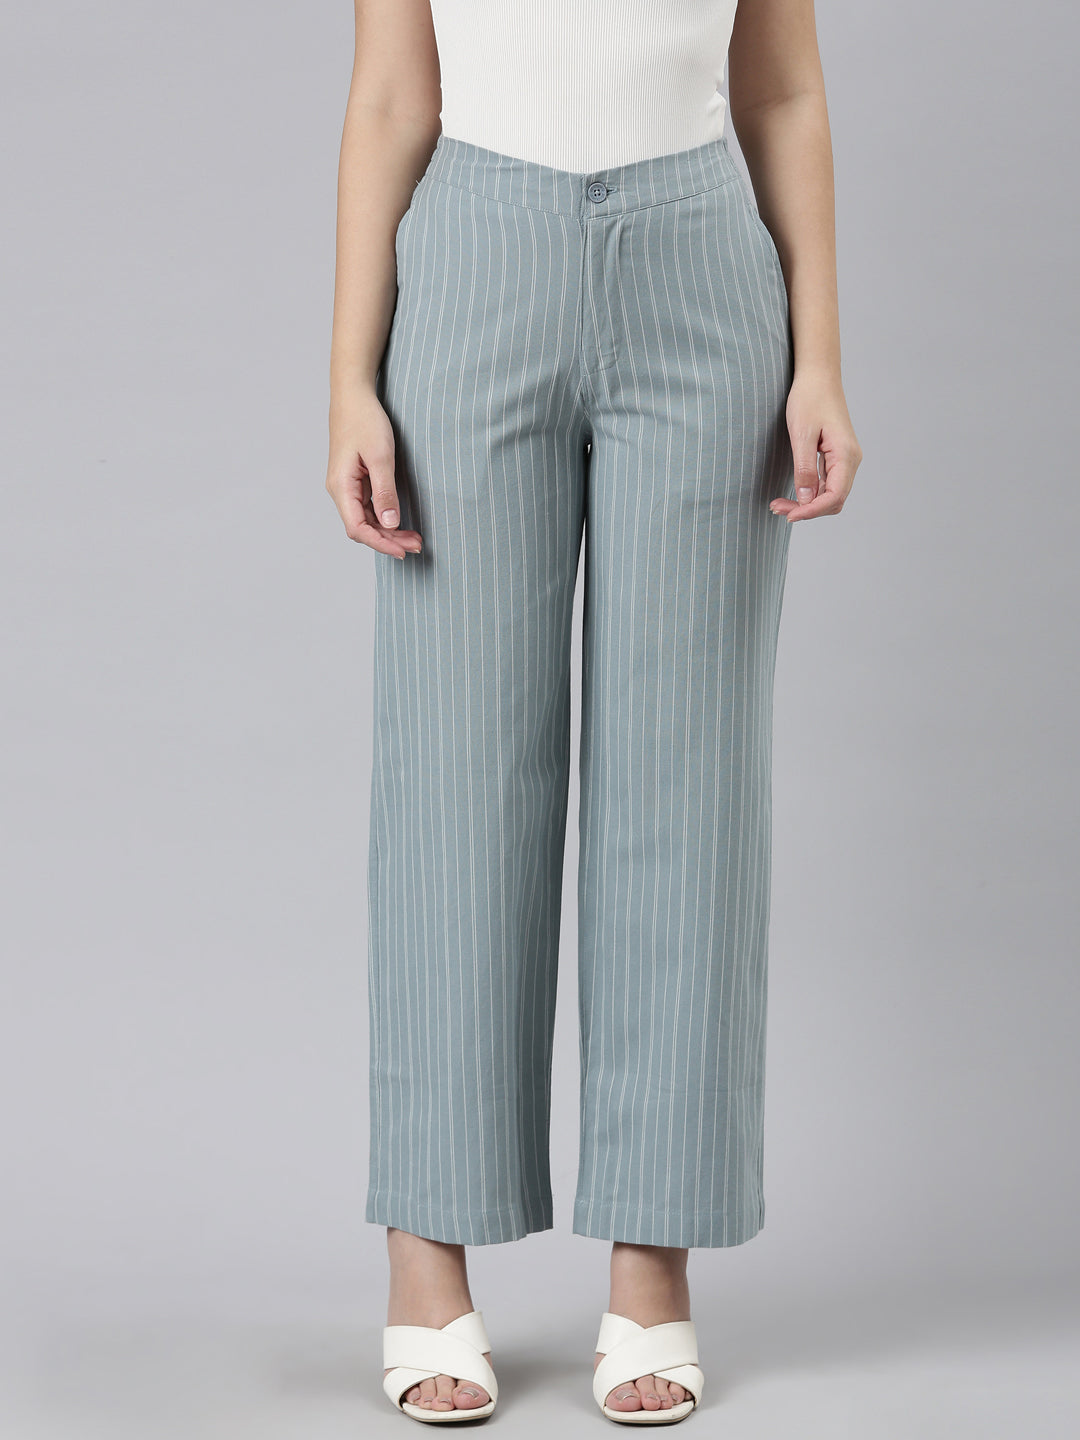 Teal Striped Cotton Trousers  ADORNED